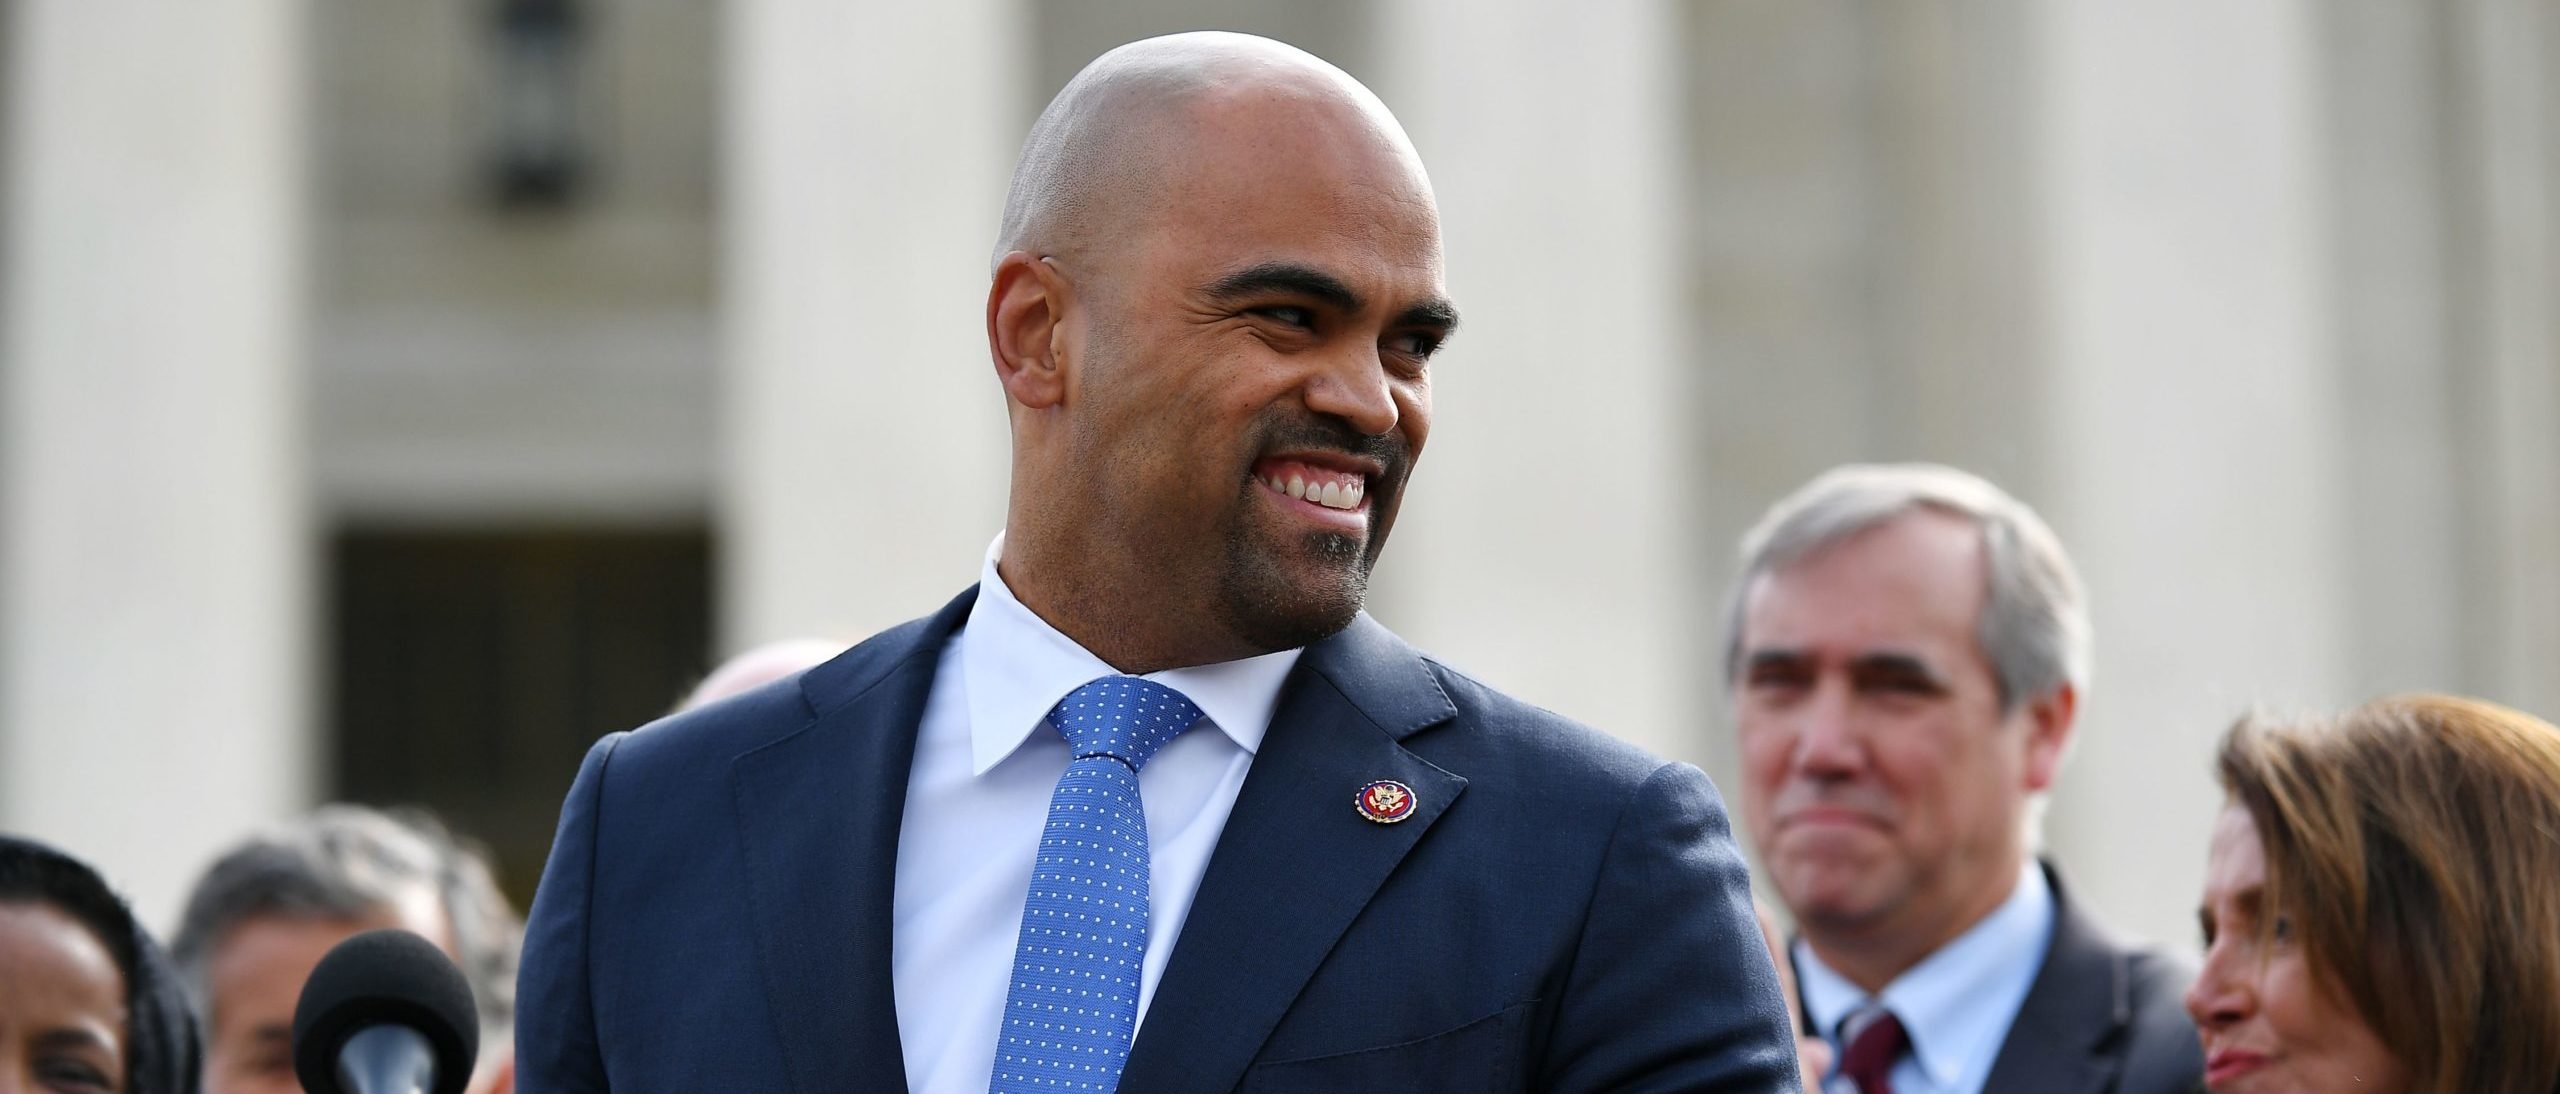 Dem Rep. Colin Allred To Challenge Ted Cruz In 2024 Senate Race | The